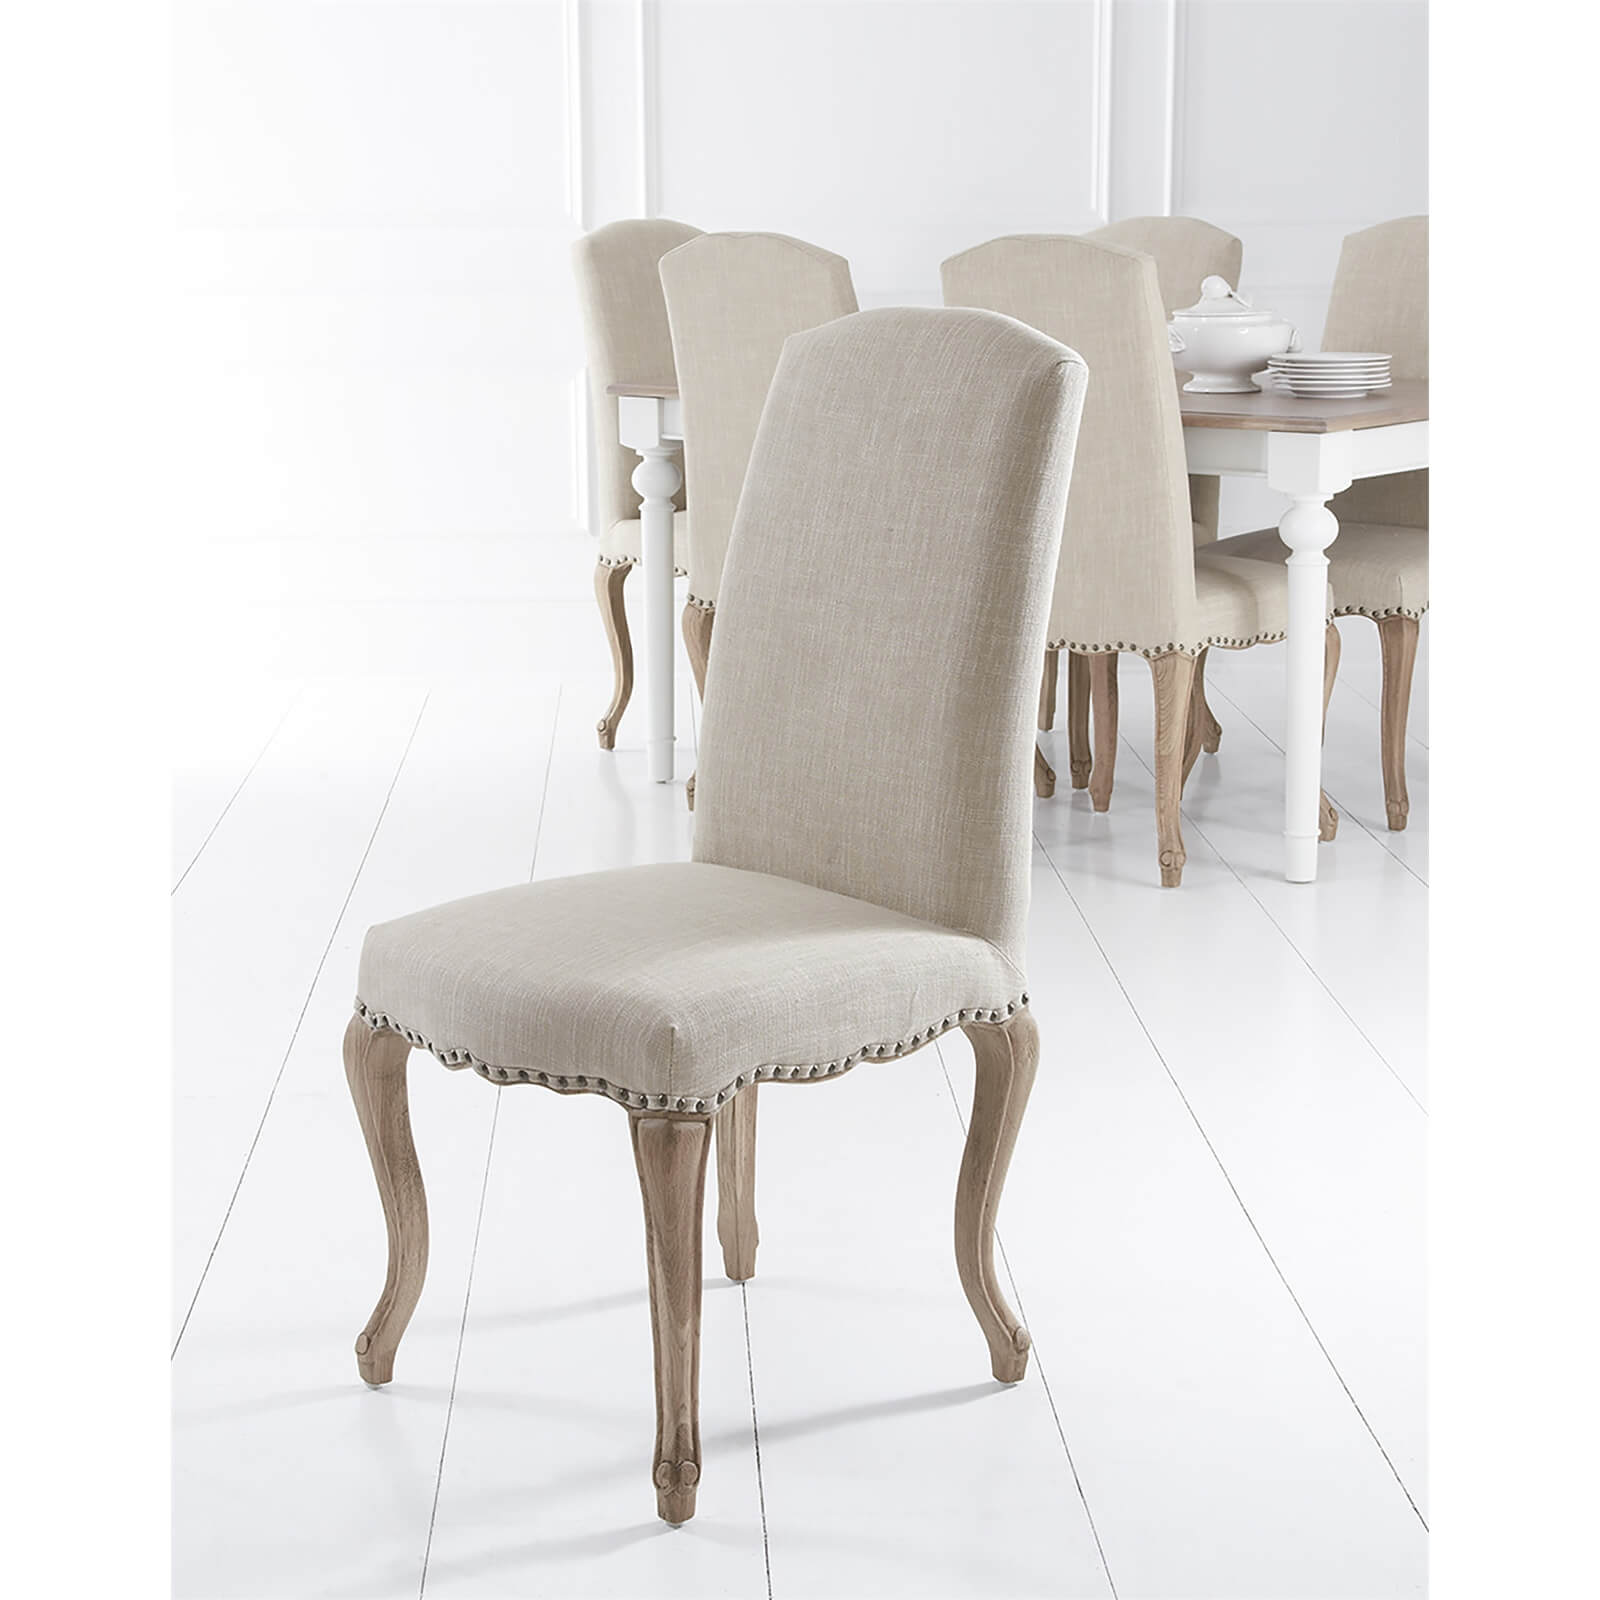 Studded Dining Chair - Set of 2 - Beige